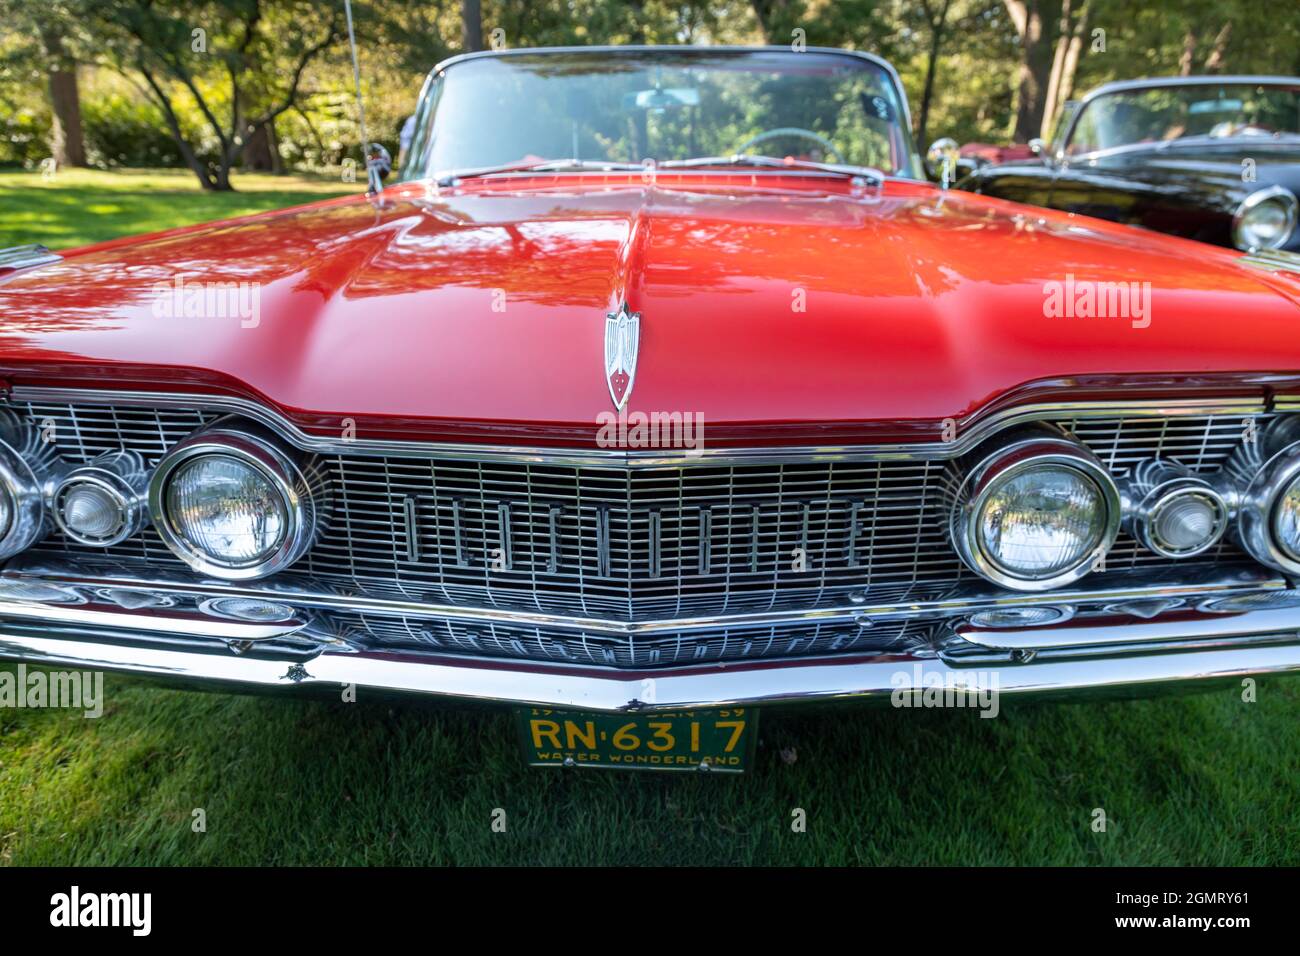 Grosse Pointe Shores, Michigan - A 1959 Super 88 Oldsmobile Convertible at the Eyes on Design auto show. This year's show featured primarily brands th Stock Photo